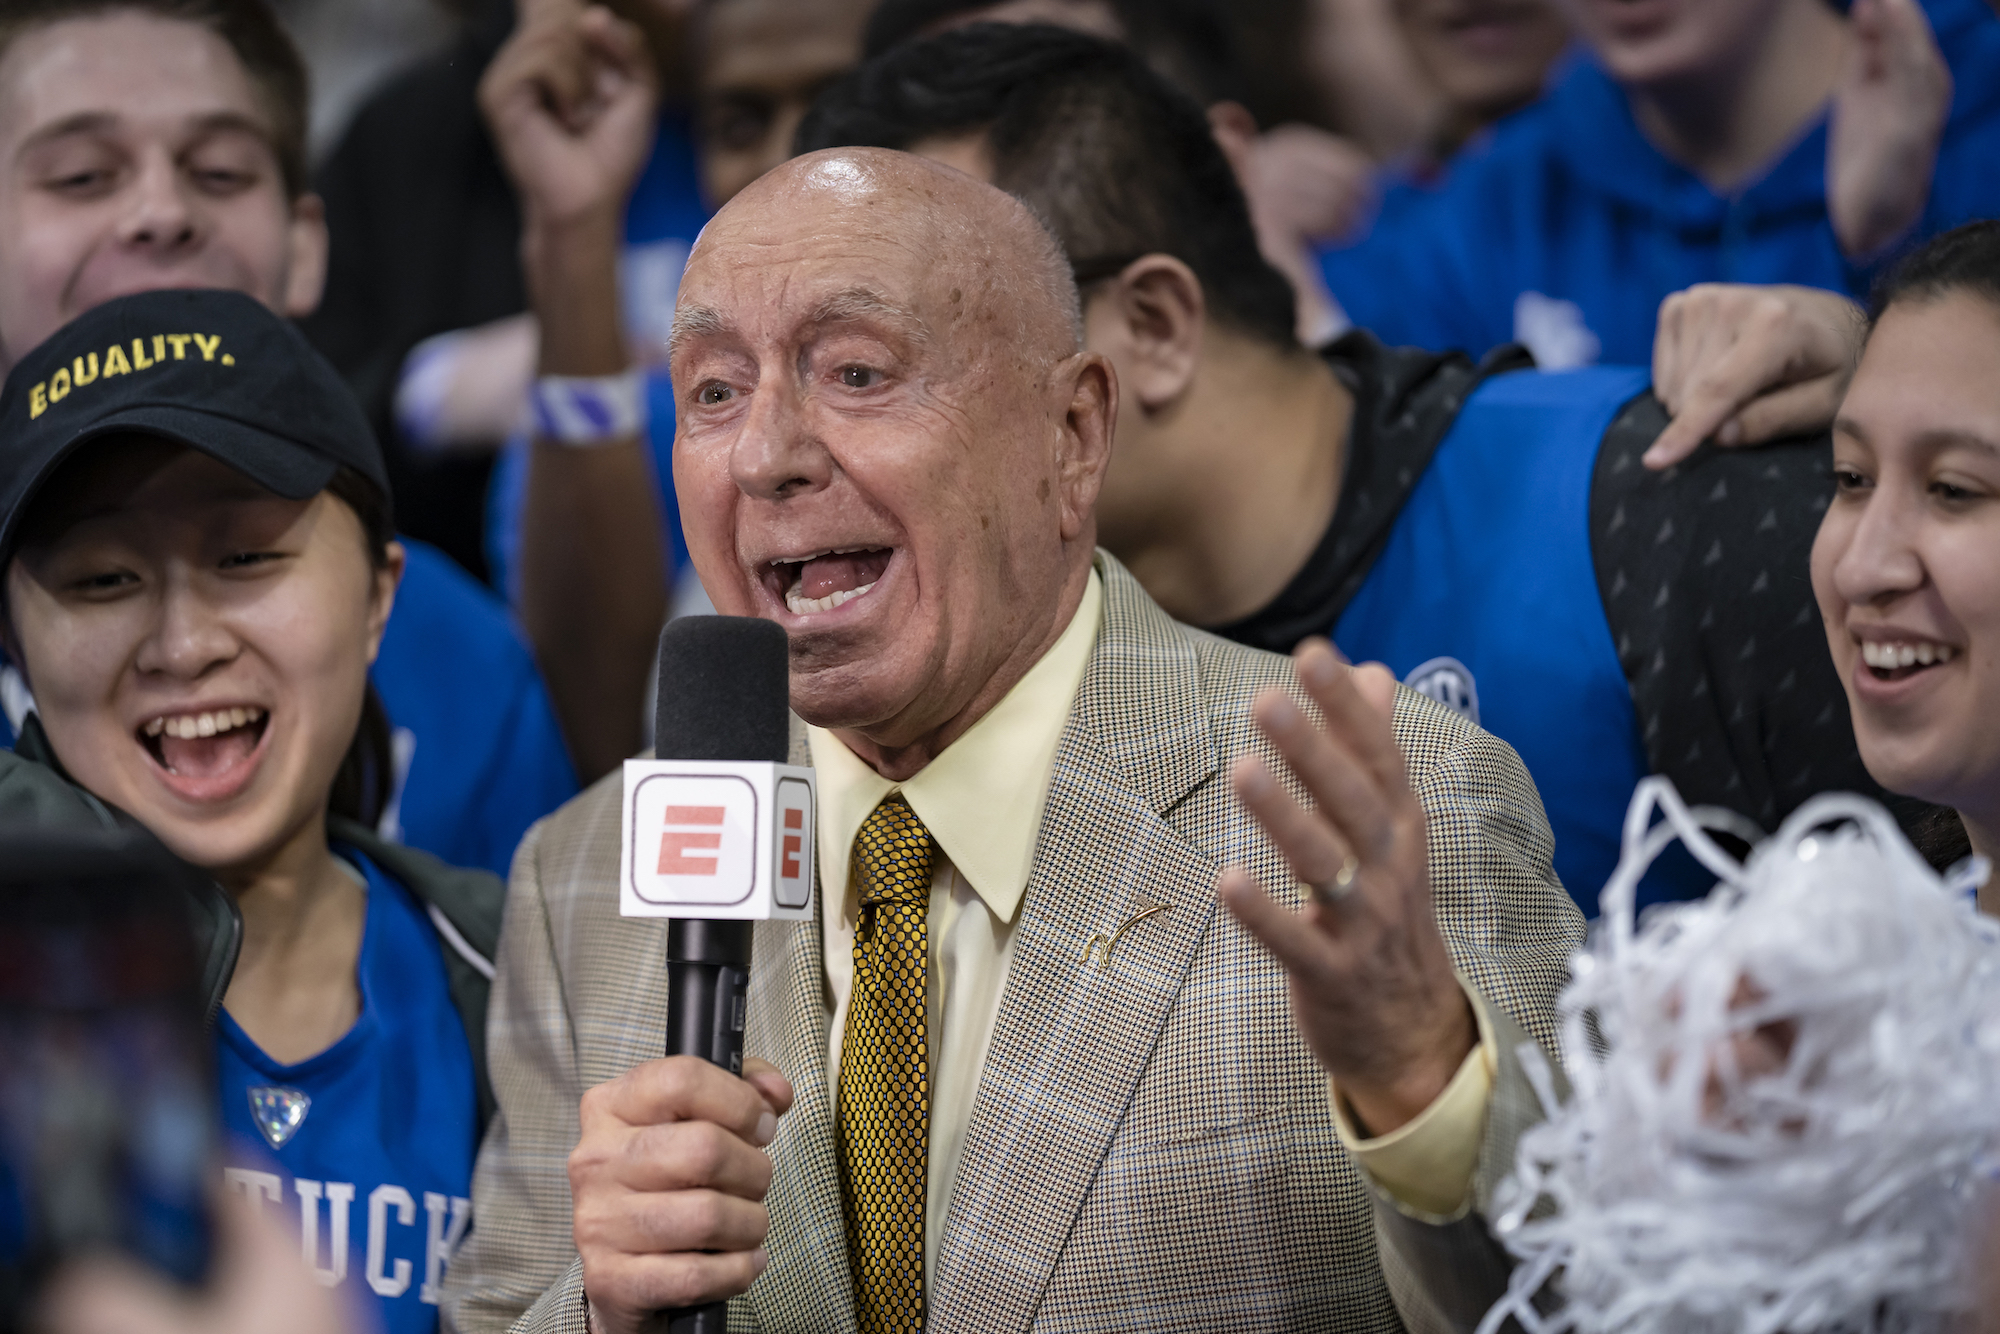 Dick Vitale Almost Quit ESPN After Viewers Cruelly Criticized His Appearance